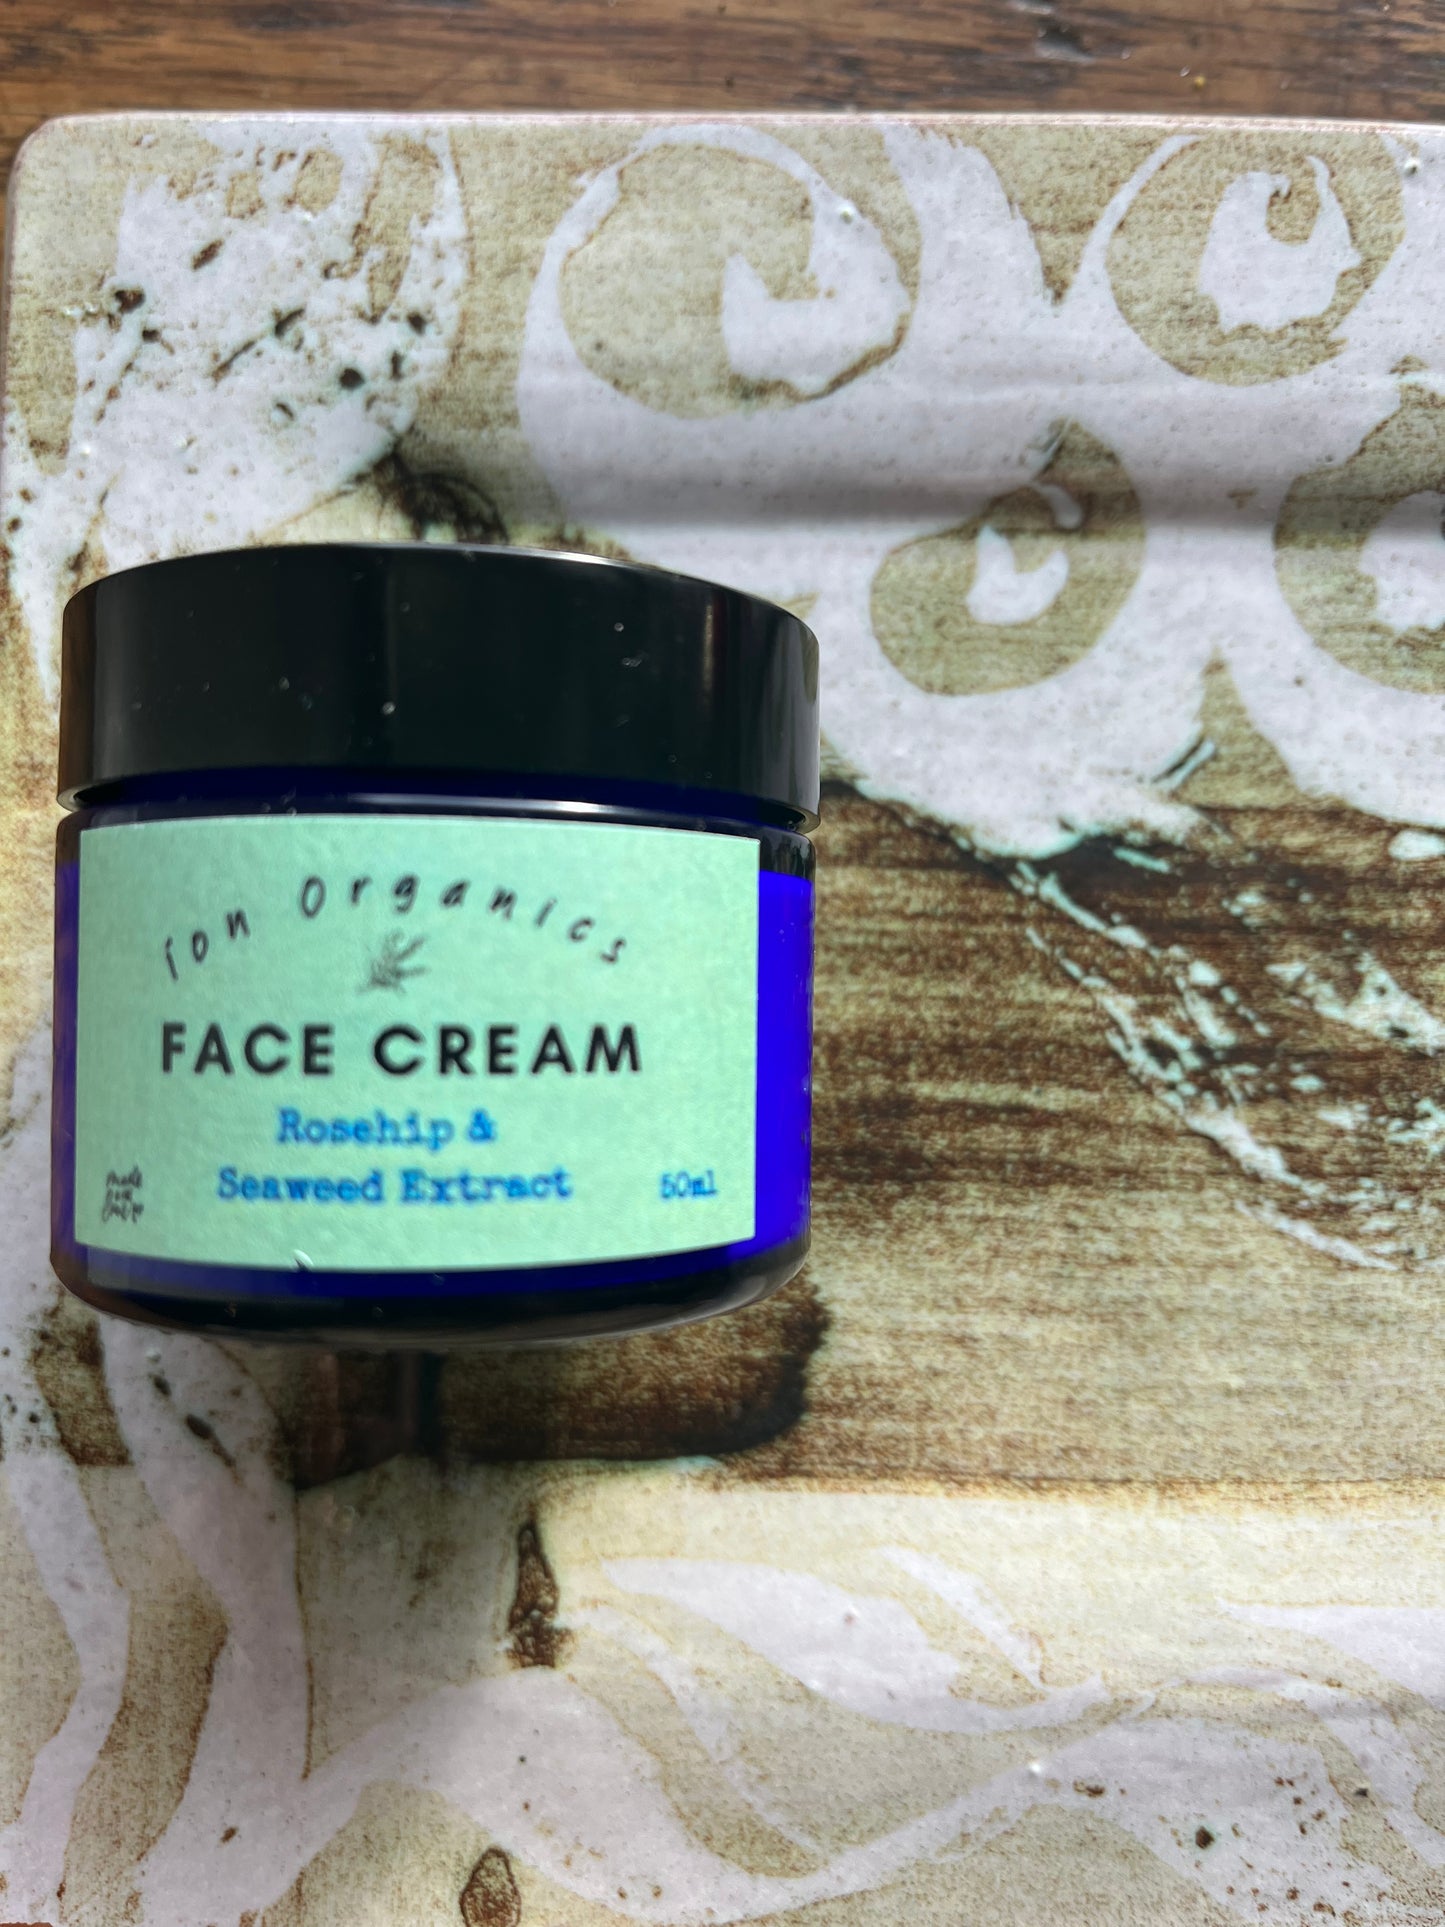 Organic Rosehip and Seaweed Extract Face Cream